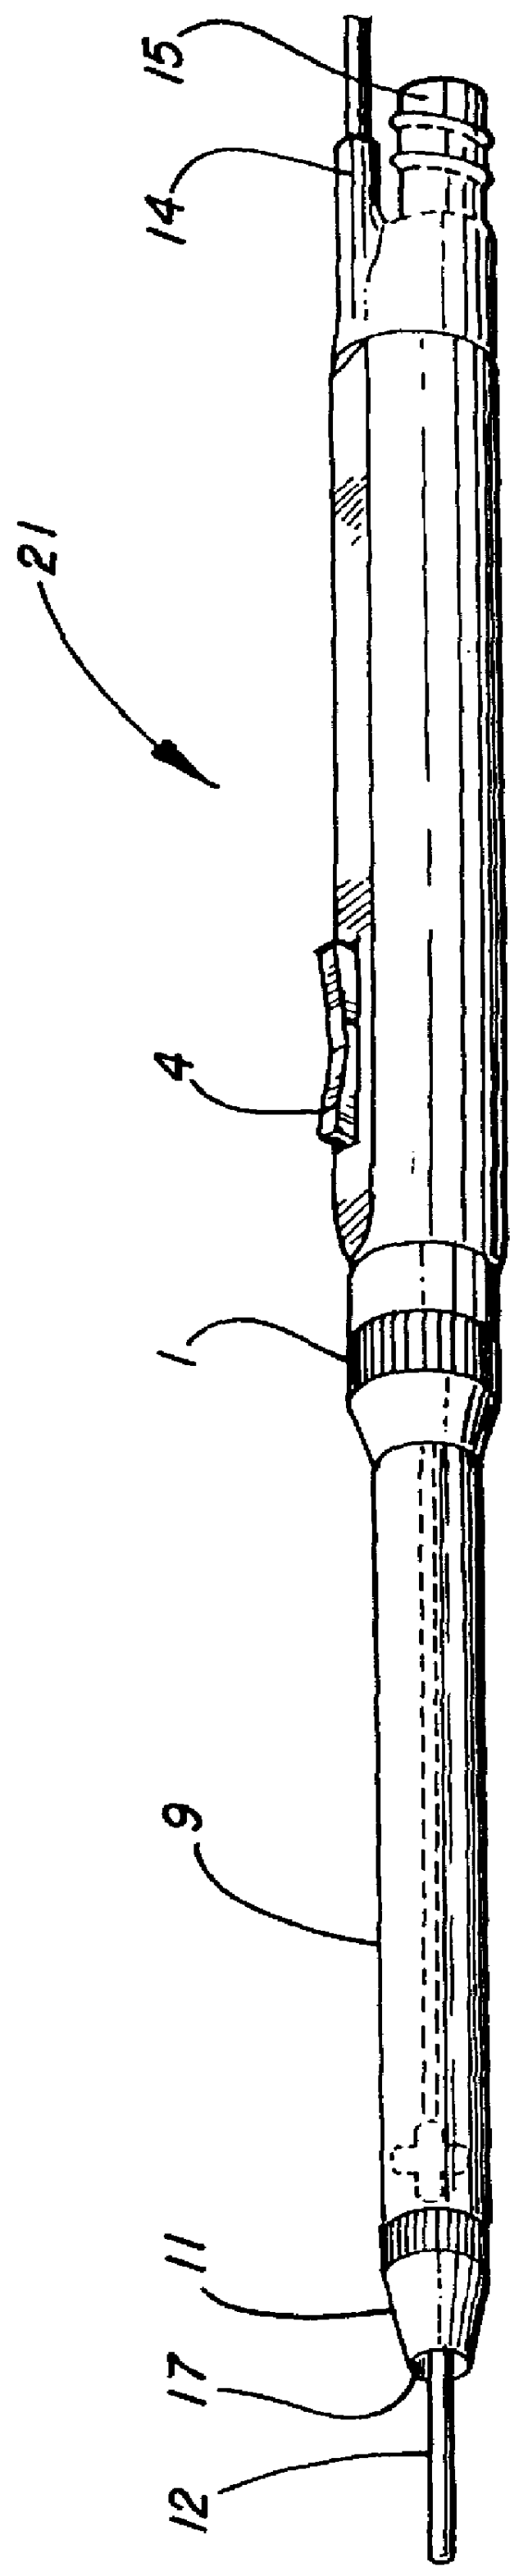 Removable shroud for receiving a pencil used in electro-surgery